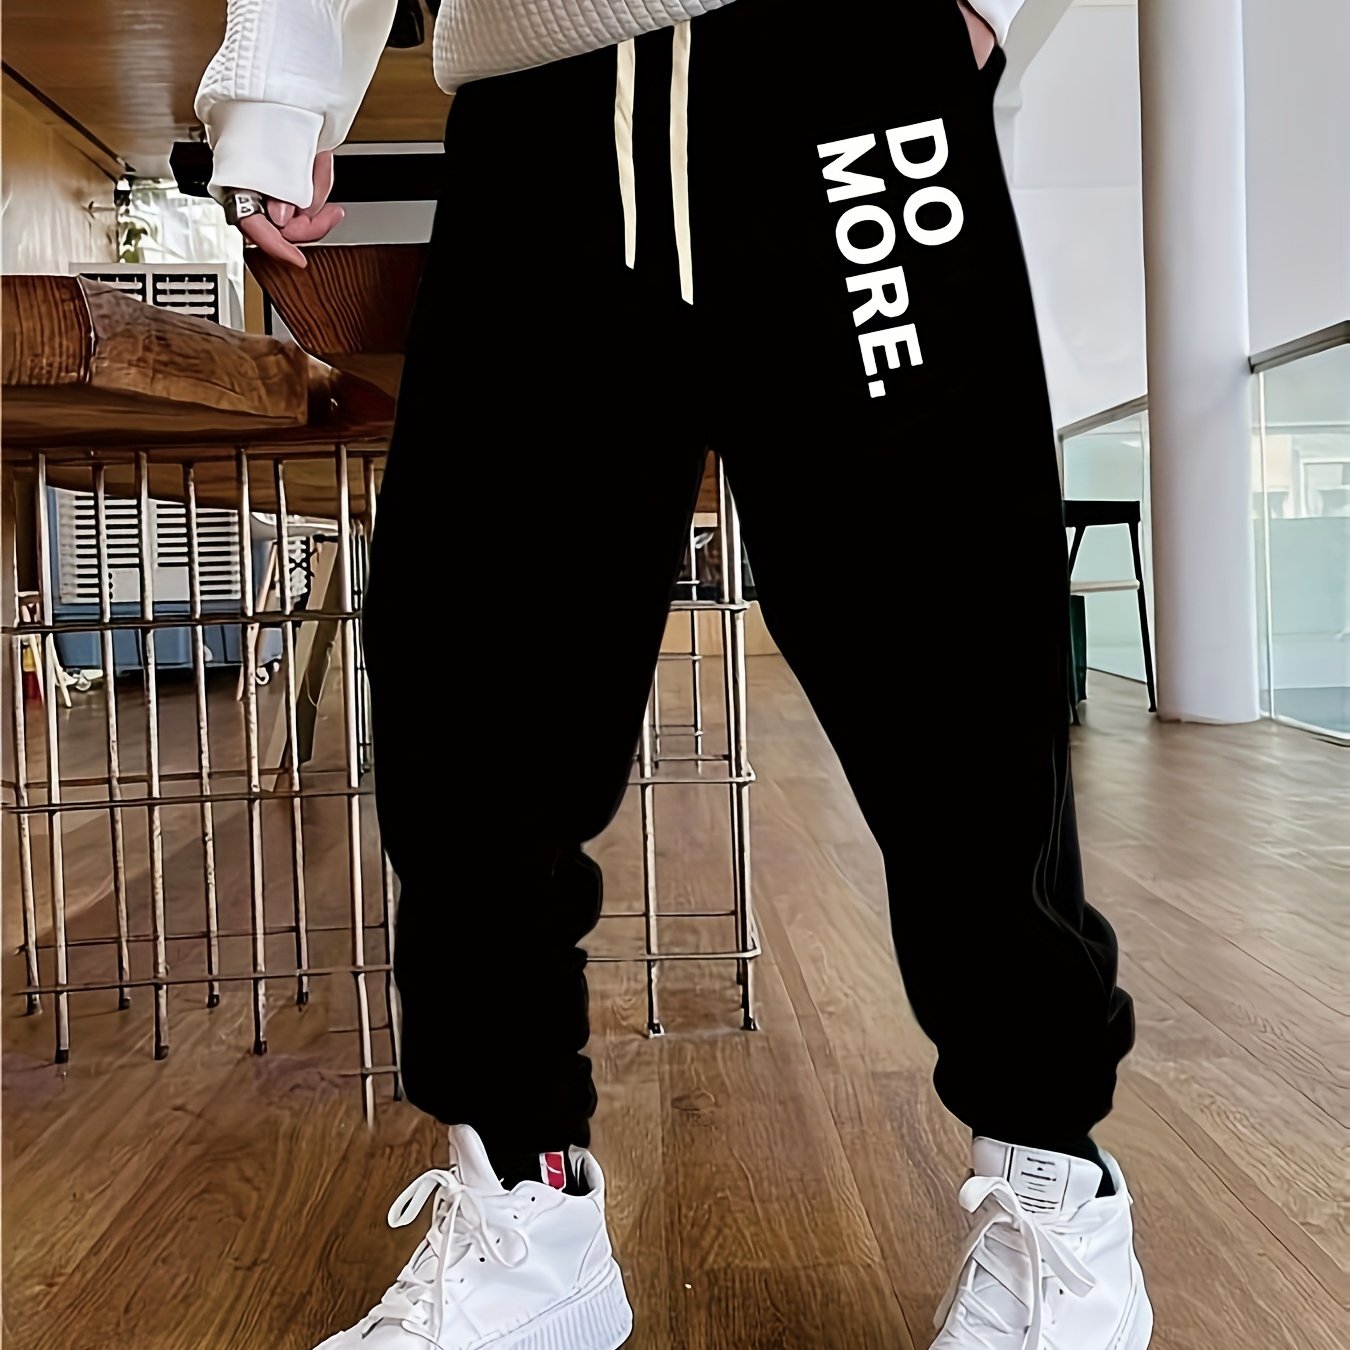 DO MORE Print Men's Chic Sports Jogger With Drawstring For All Seasons Outdoor, Men's Leisurewear